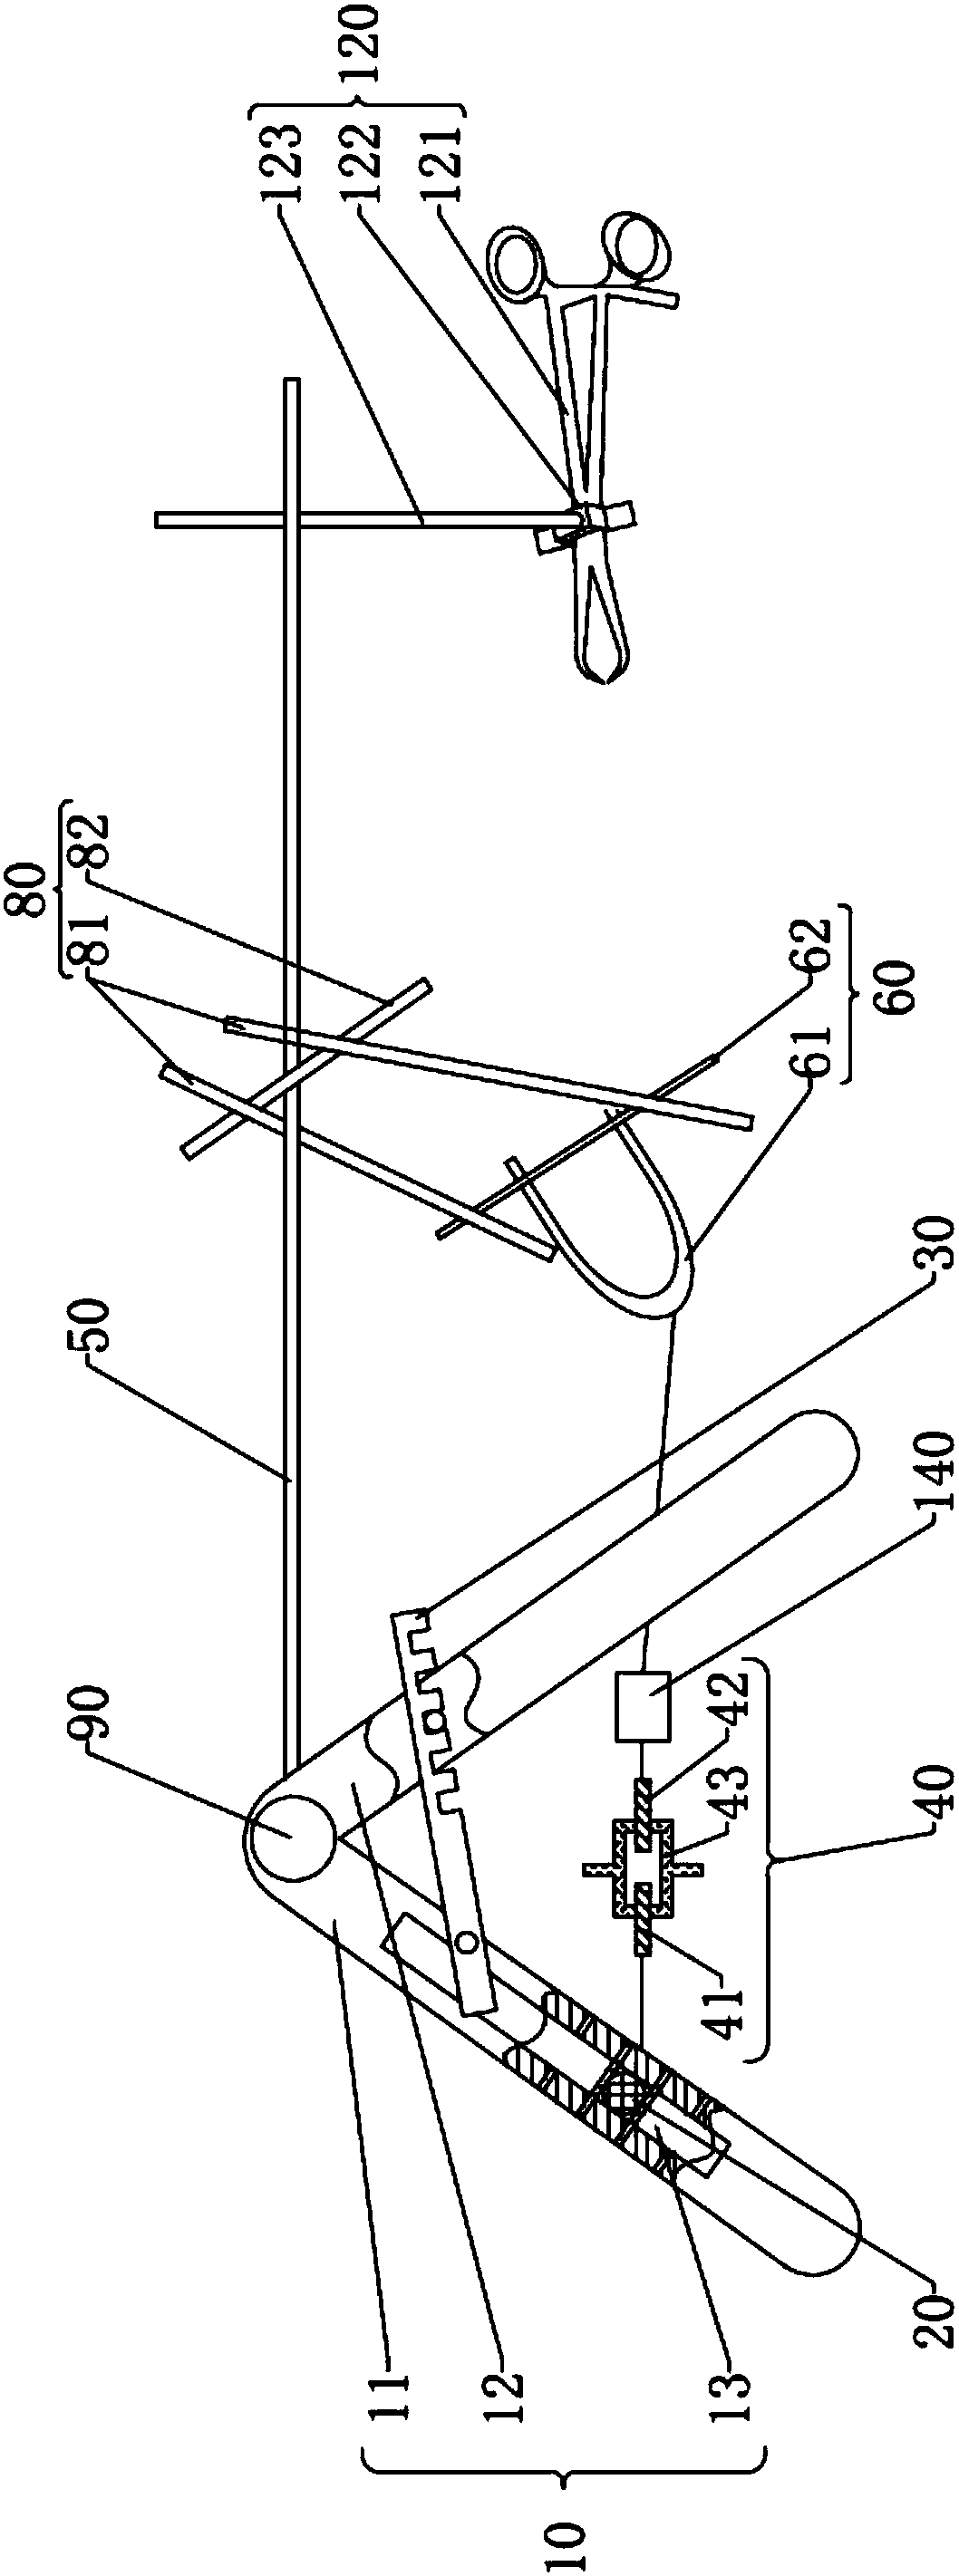 Skeletal traction reposition fixing device and method for treating limb fractures